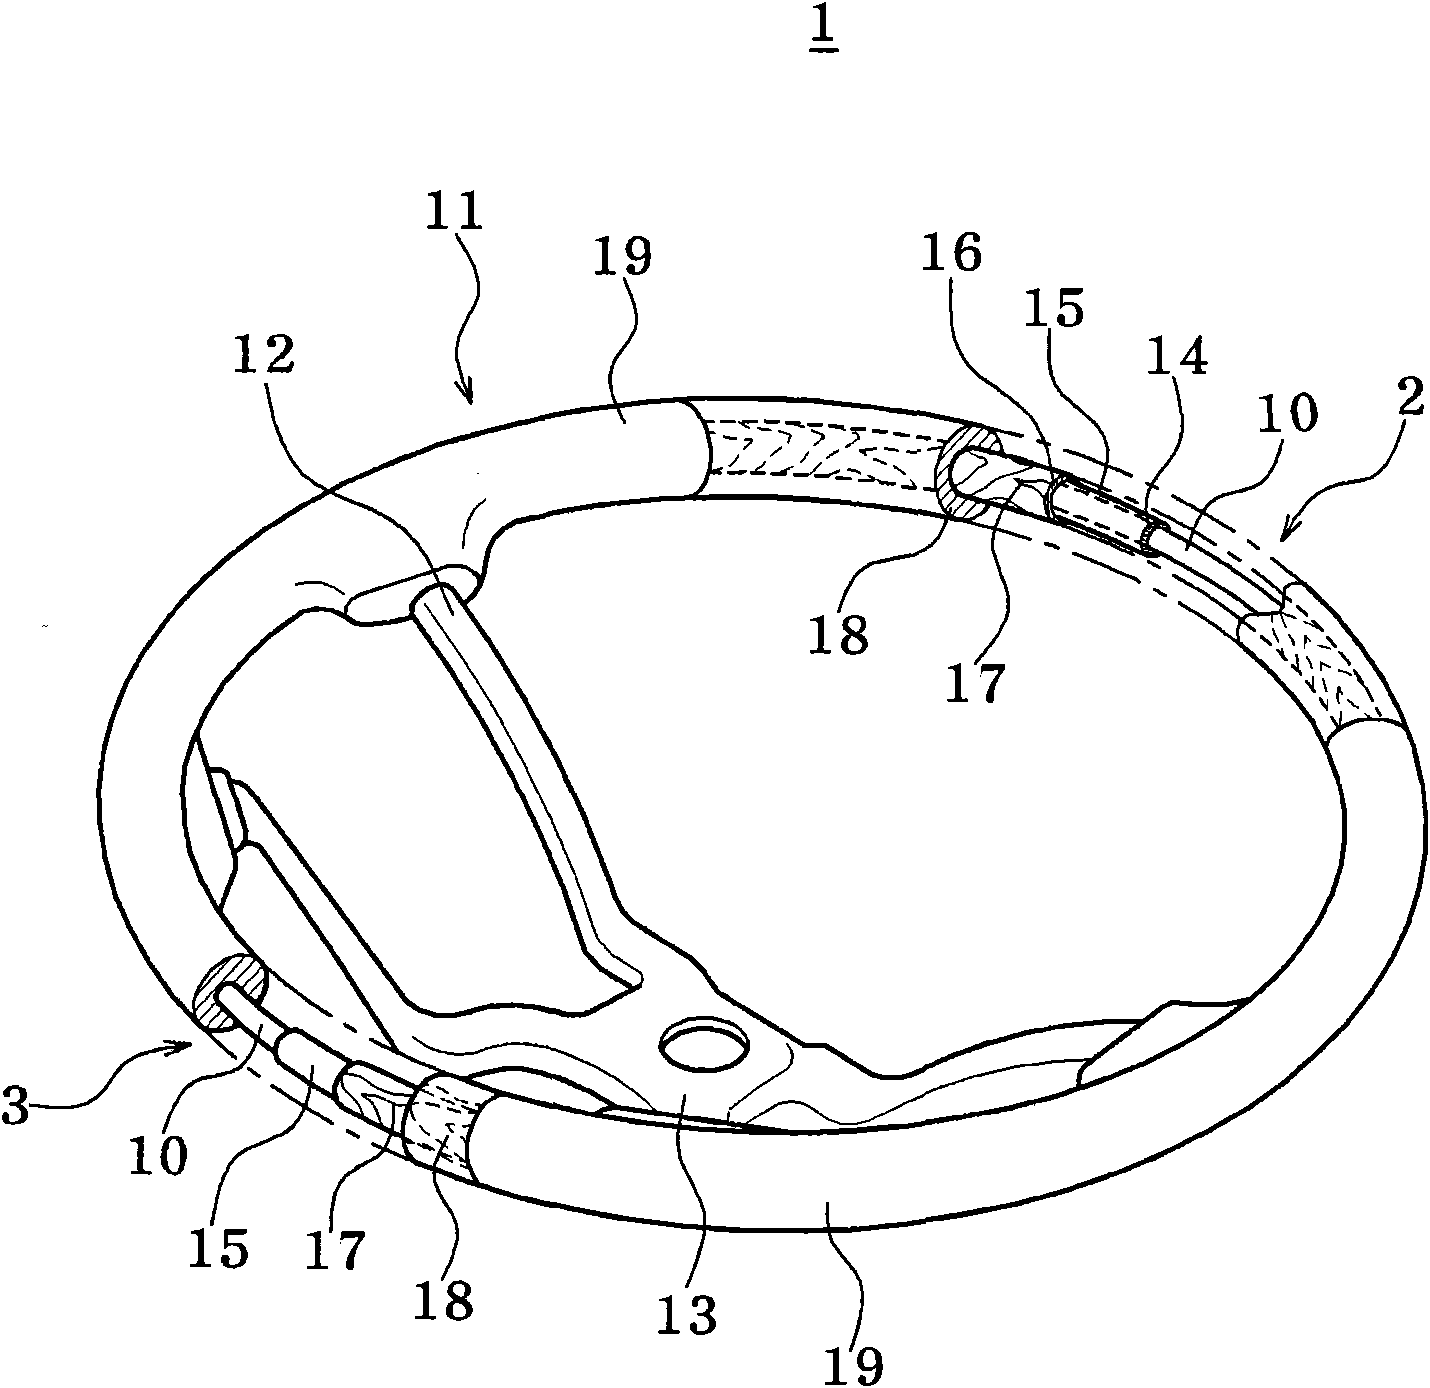 Steering wheel for automobile and method of fabricating the same